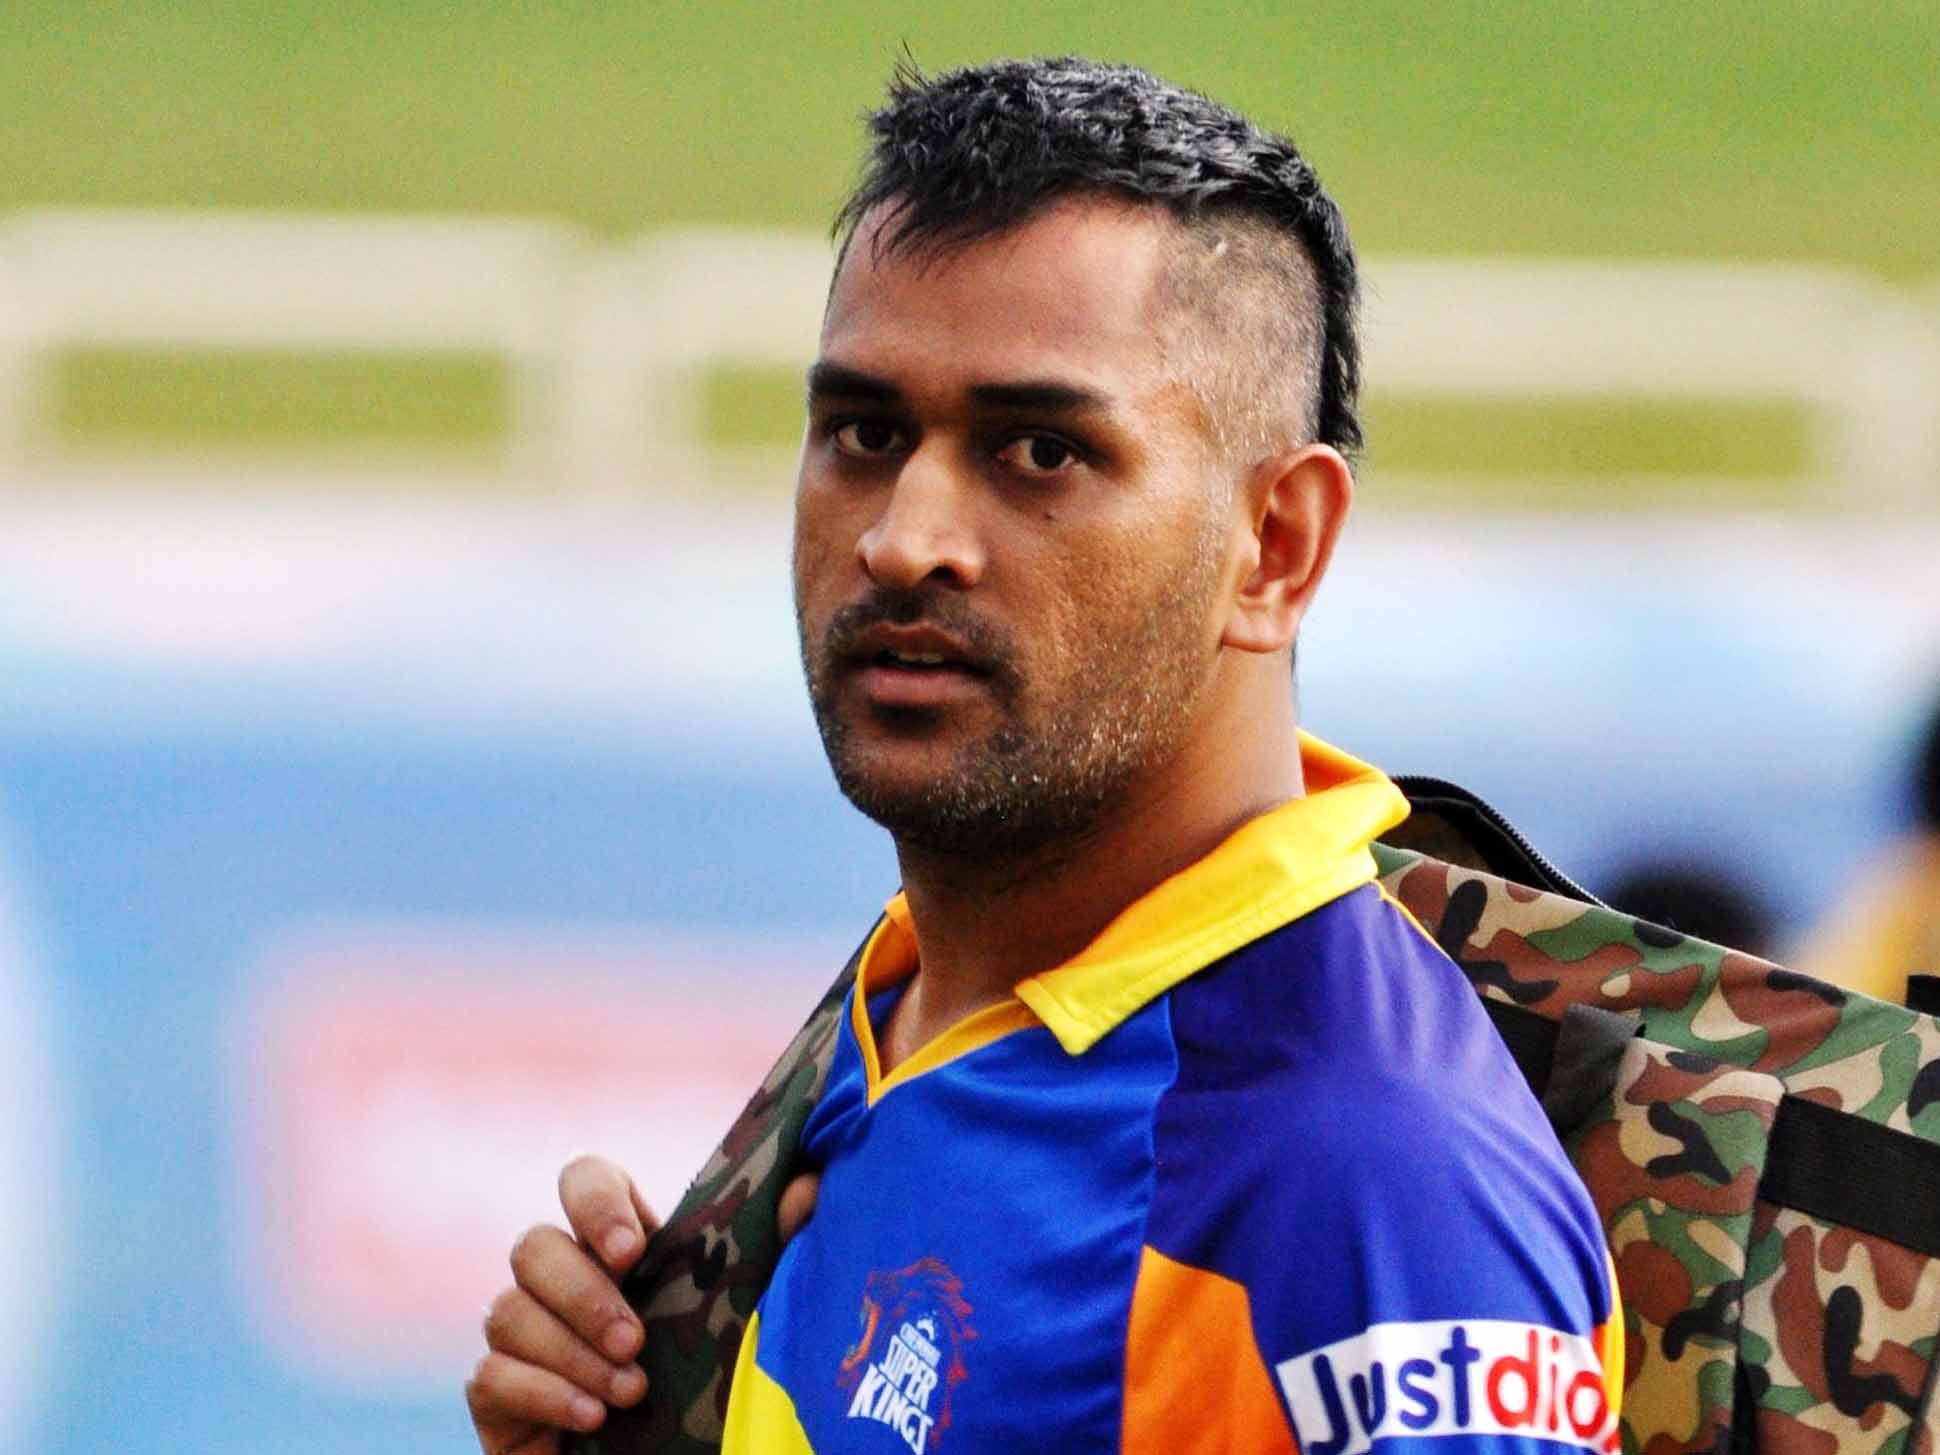 Mahendra Singh Dhoni cute hd wallpapers | Wallpapers Wide Free